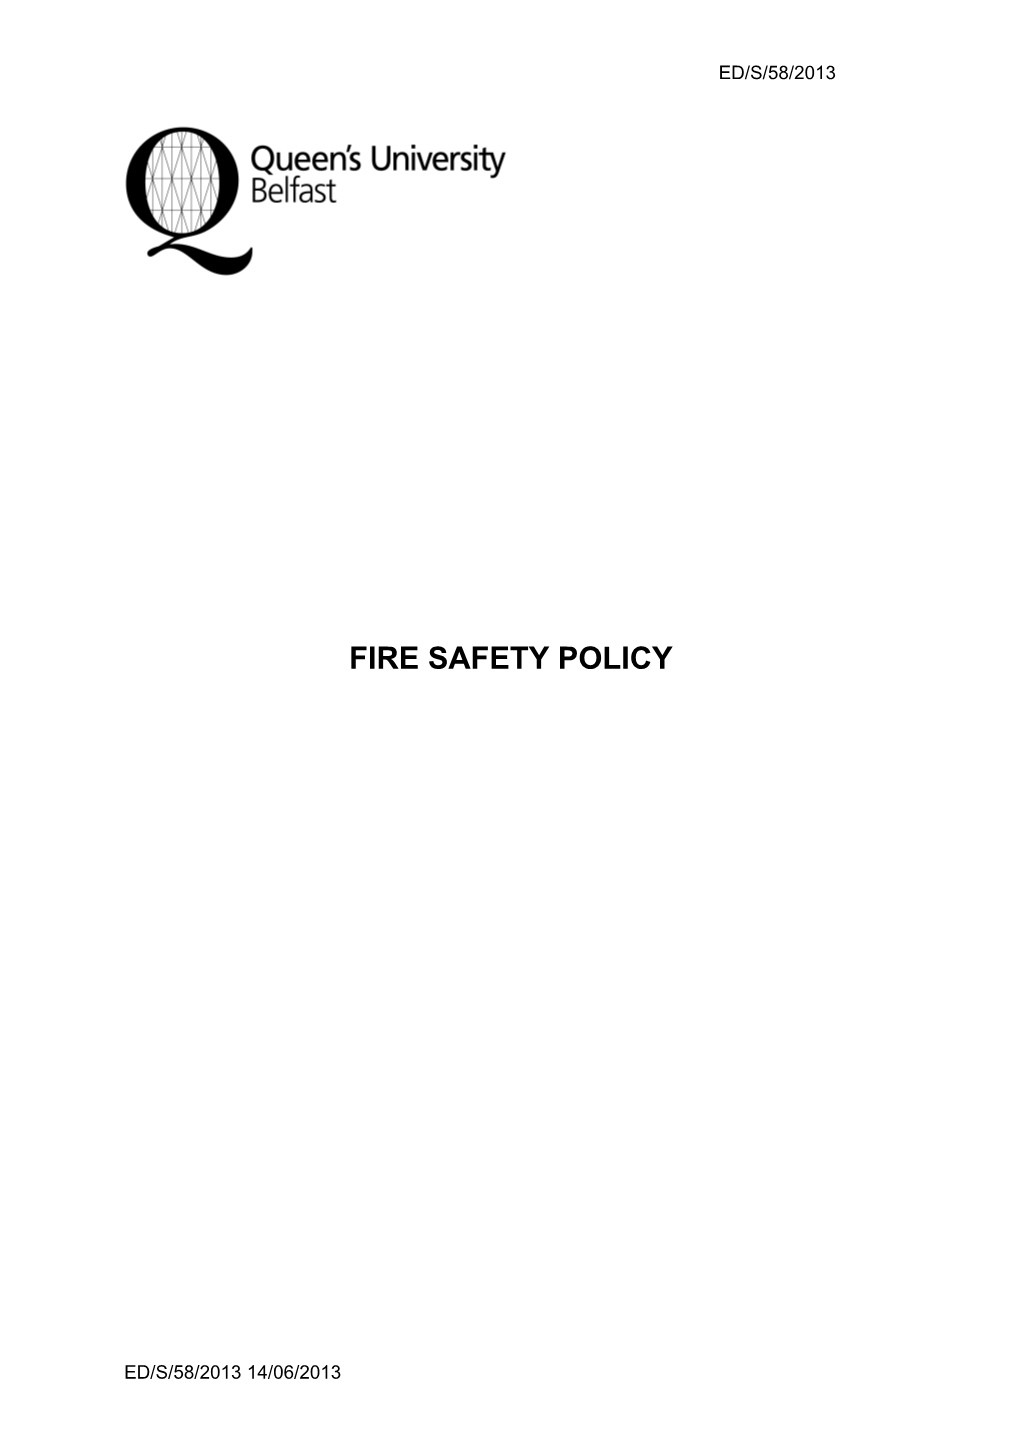 1. Fire Safety Policy Statement